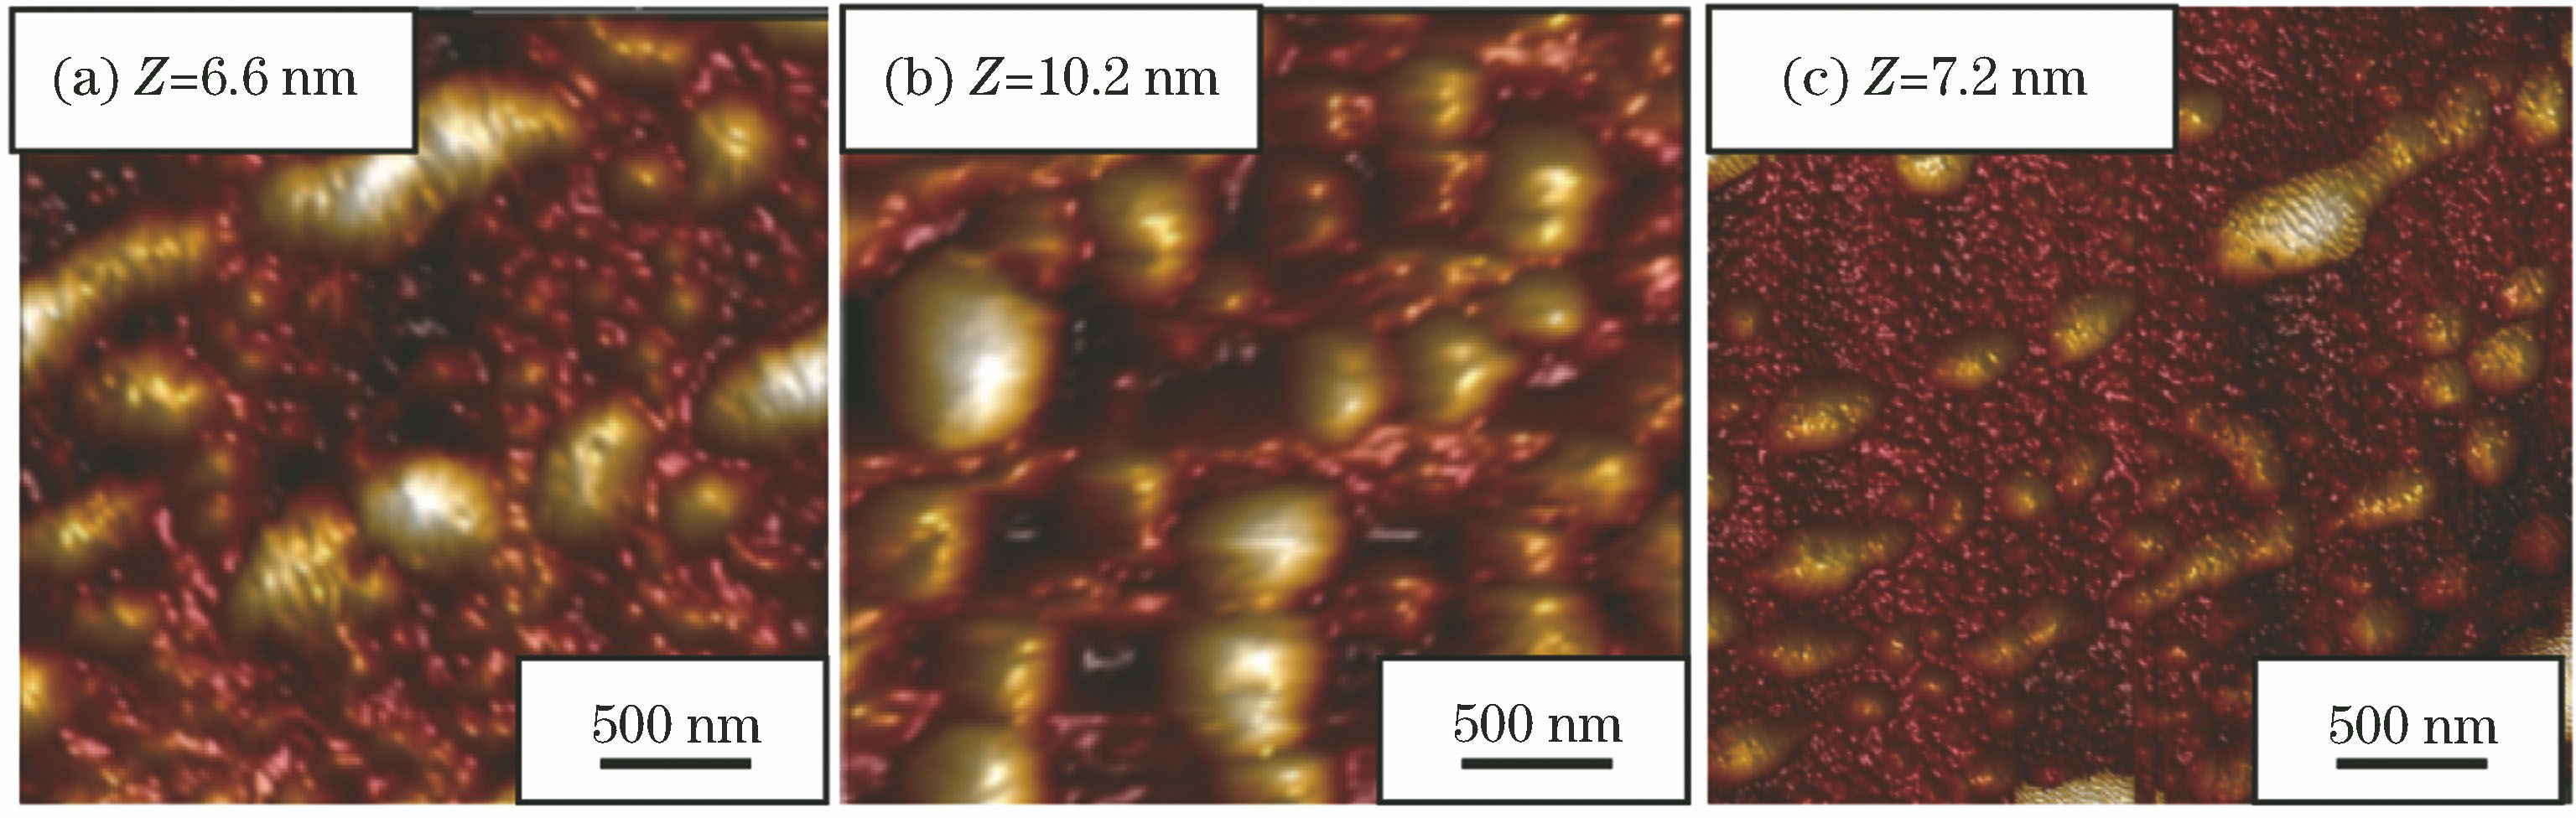 AFM images of sapphire under different etching parameters